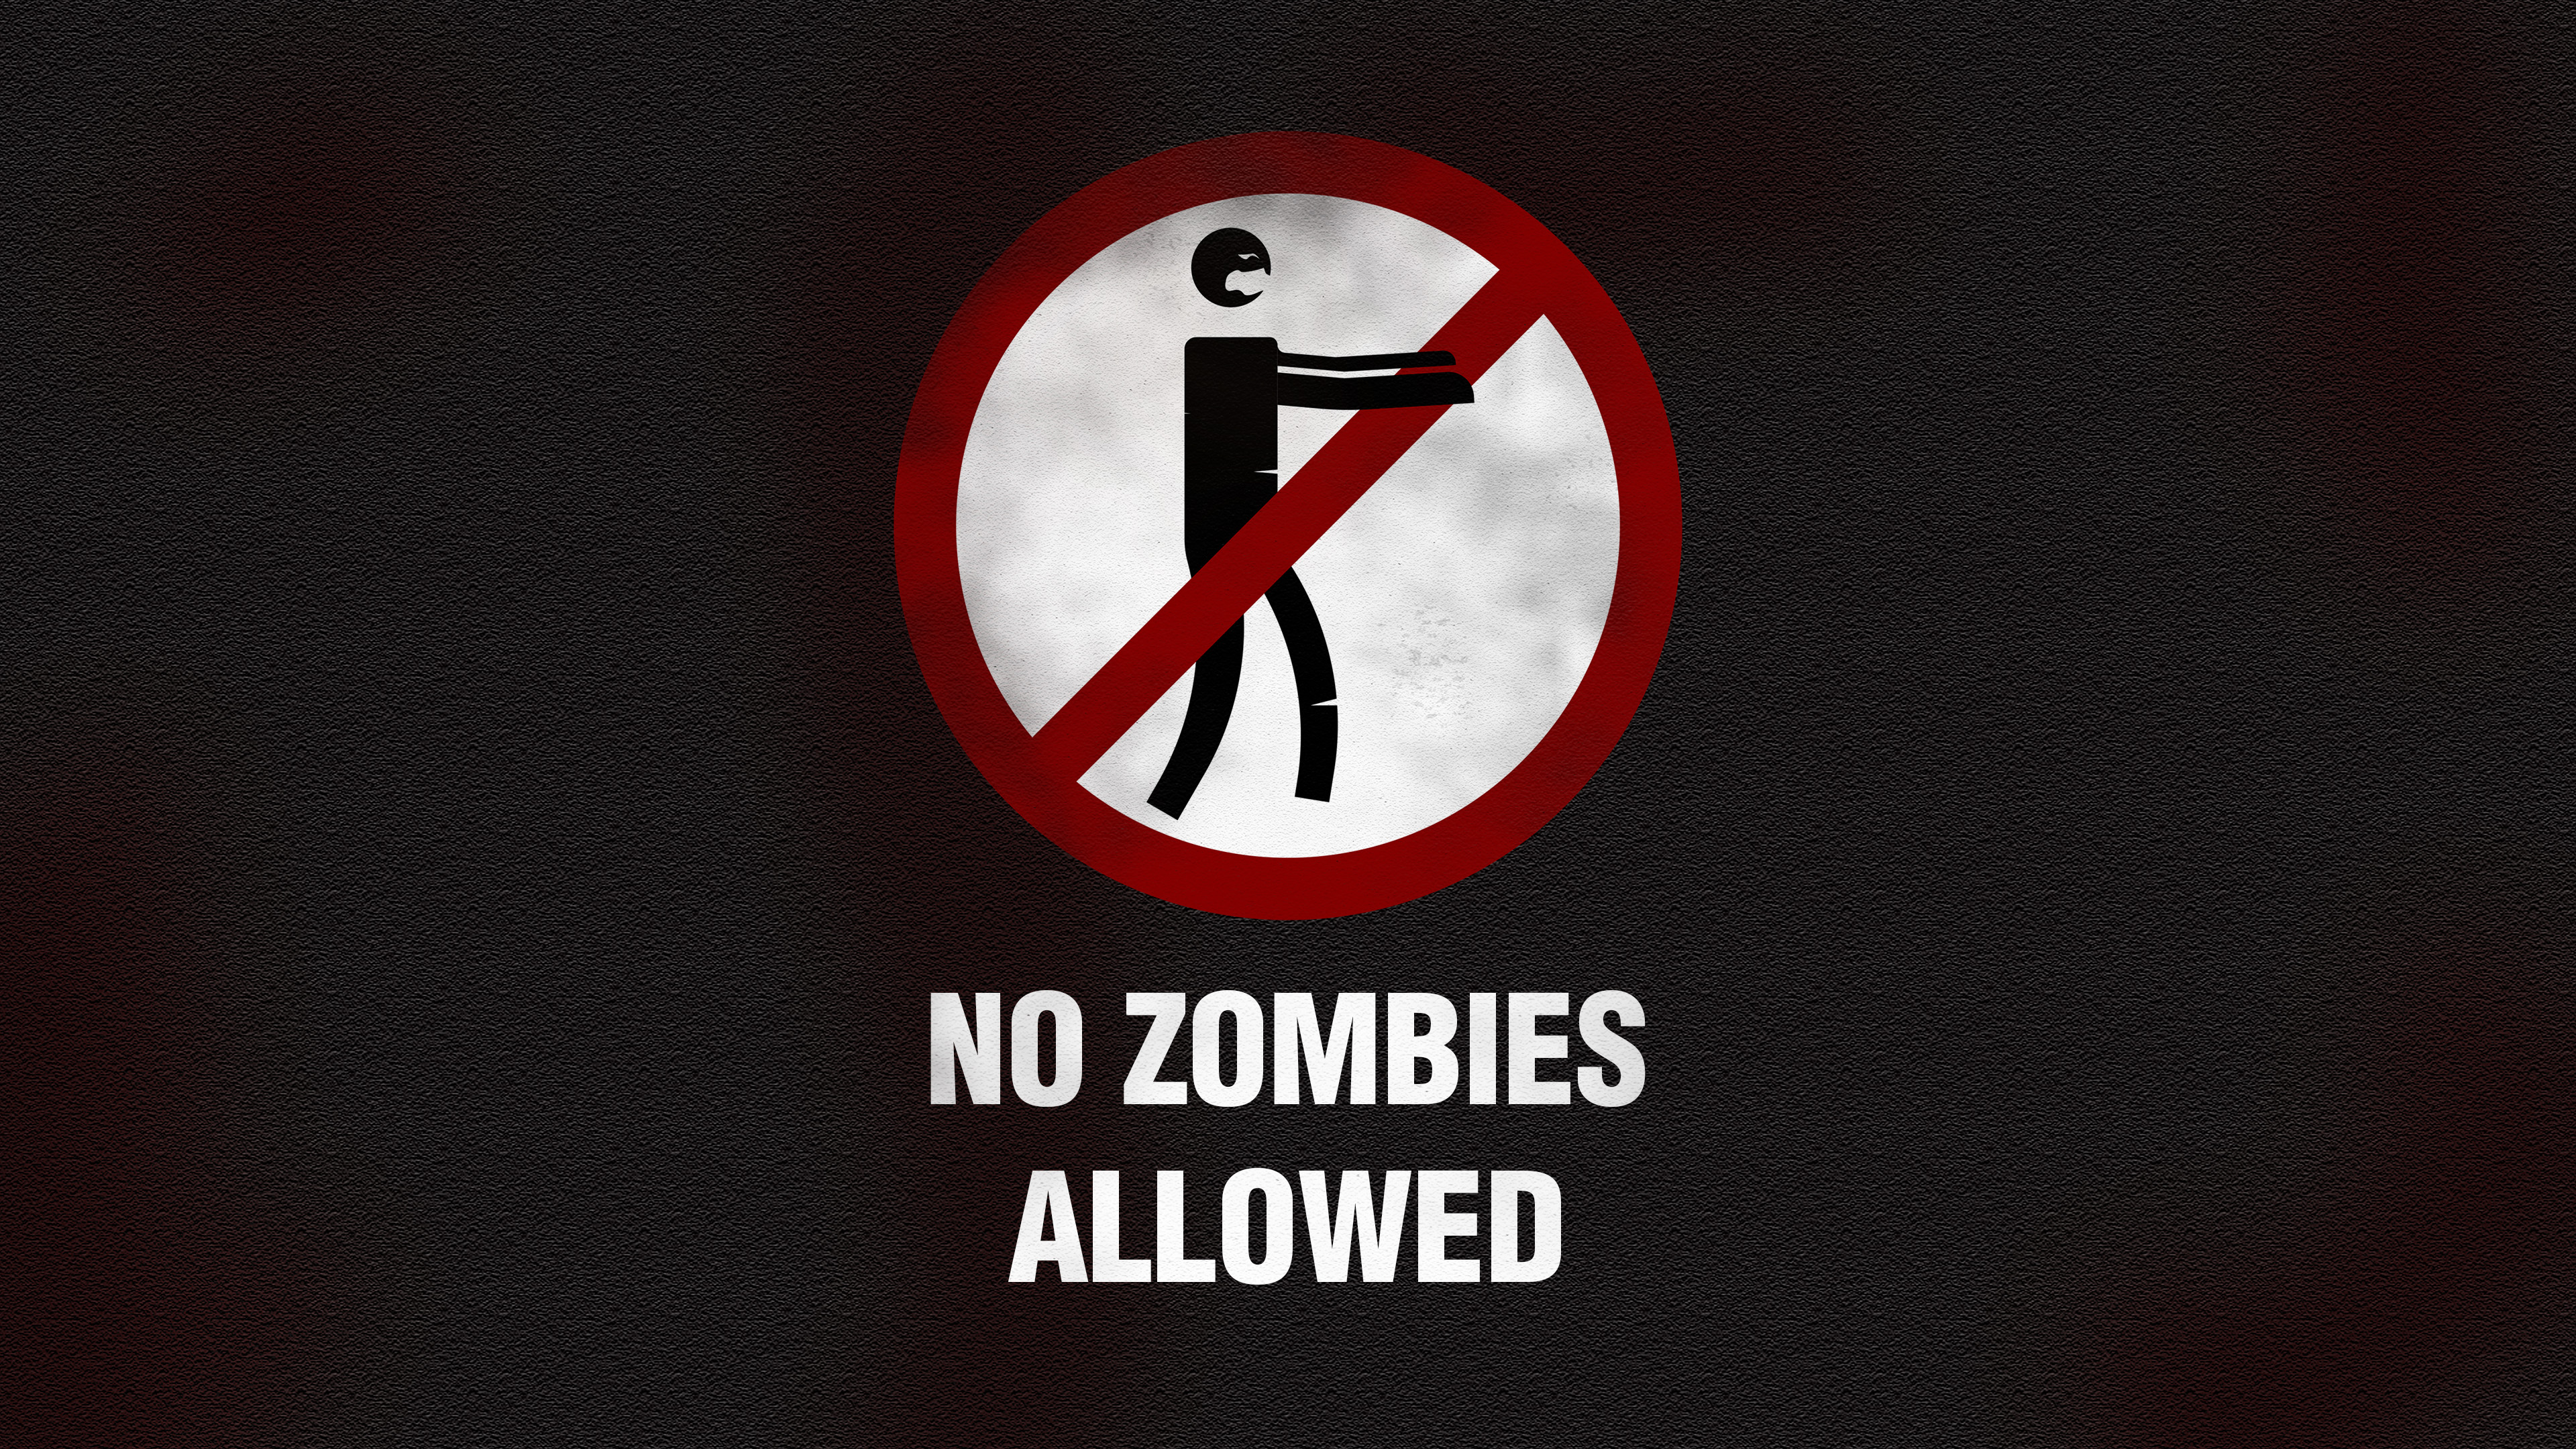 General 3840x2160 text signs DeviantArt humor typography zombies digital art simple background